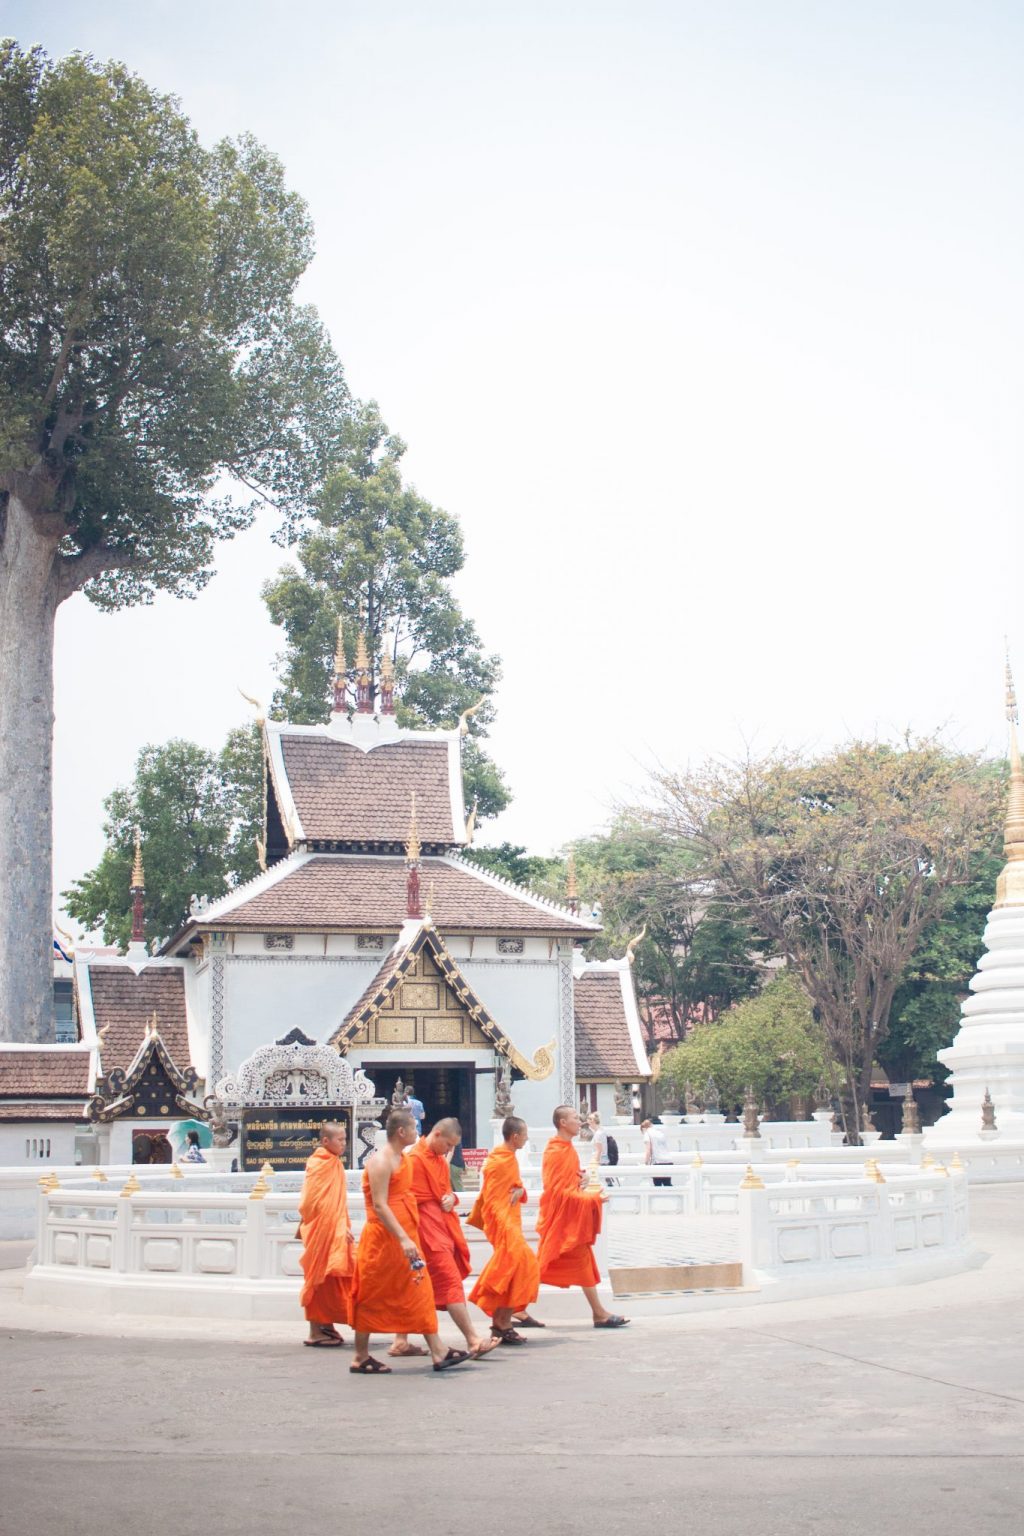 Chiang Mai buddhist temples, what to wear to the Buddhist temples in Chiang Mai, monk chats in Chiang Mai, buddhist temples in Thailand, talk to a monk in Thailand, buddhism, thai buddhism, buddhist monks in Thailand, cover your knees and shoulders at temples, dasko, dillards, comfortable shoes